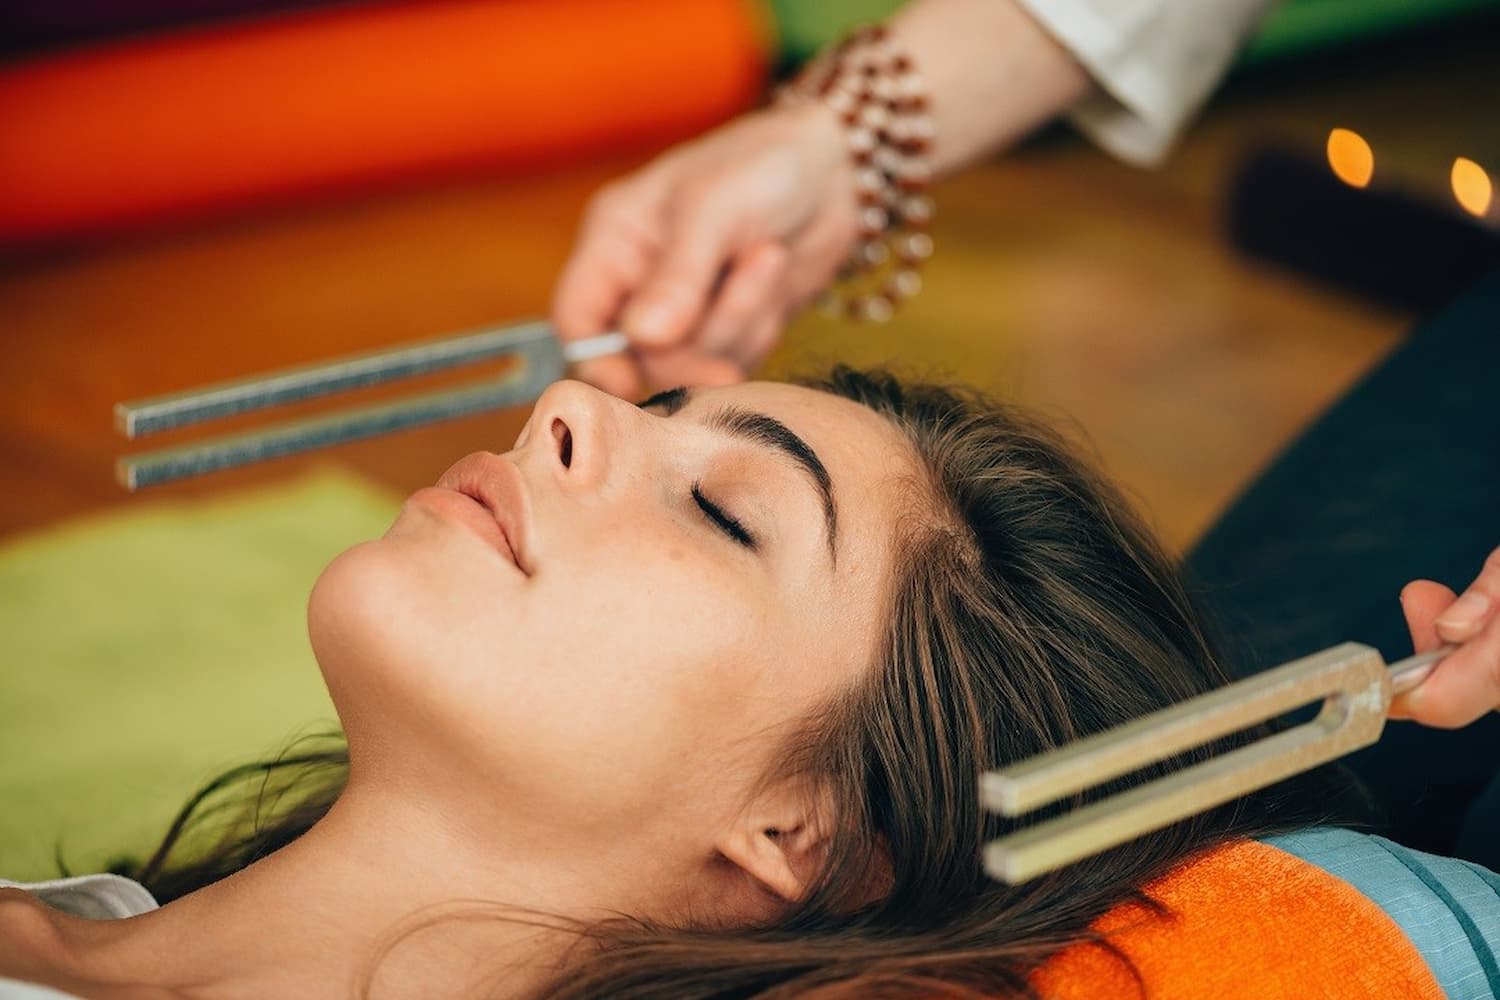 How to Become a Sound Healing Therapist